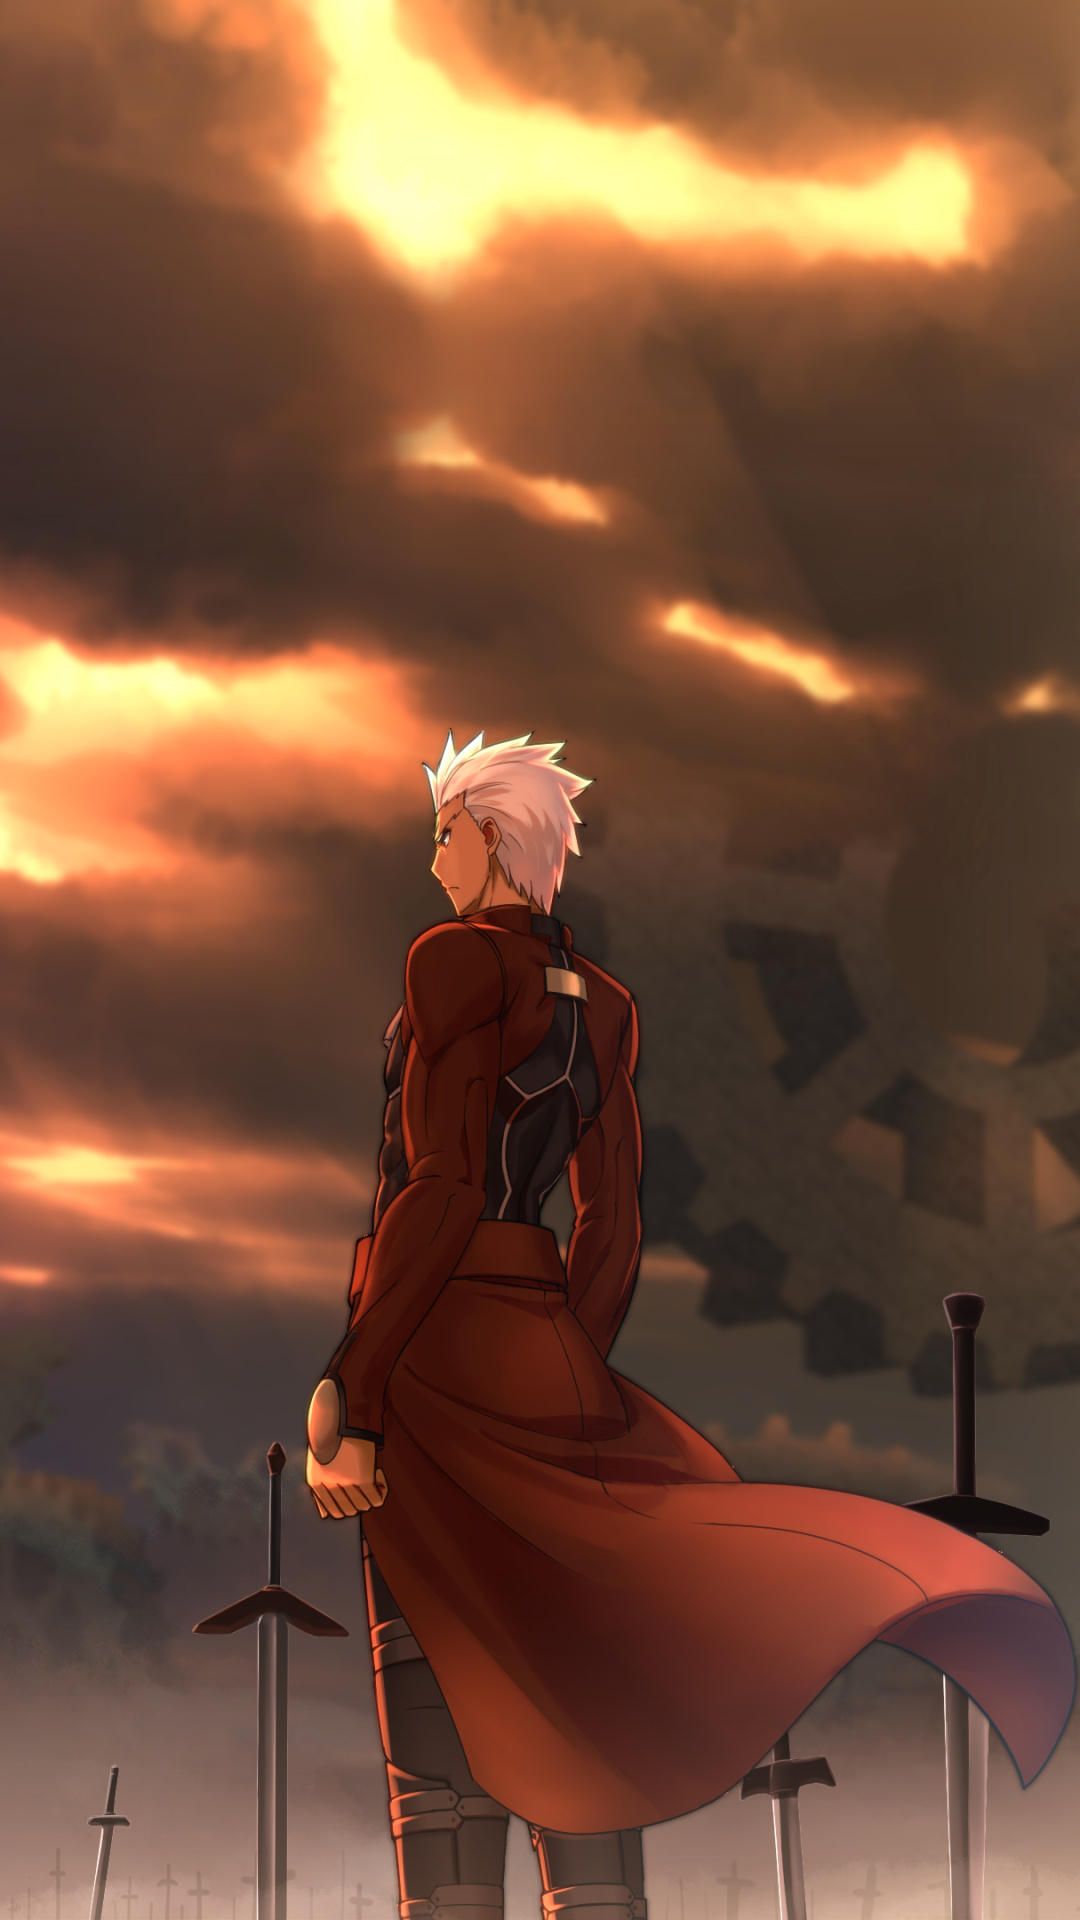 Fate/stay night: Unlimited Blade Works anime, Epic fantasy world, Magical battles, Heroic spirits, 1080x1920 Full HD Phone